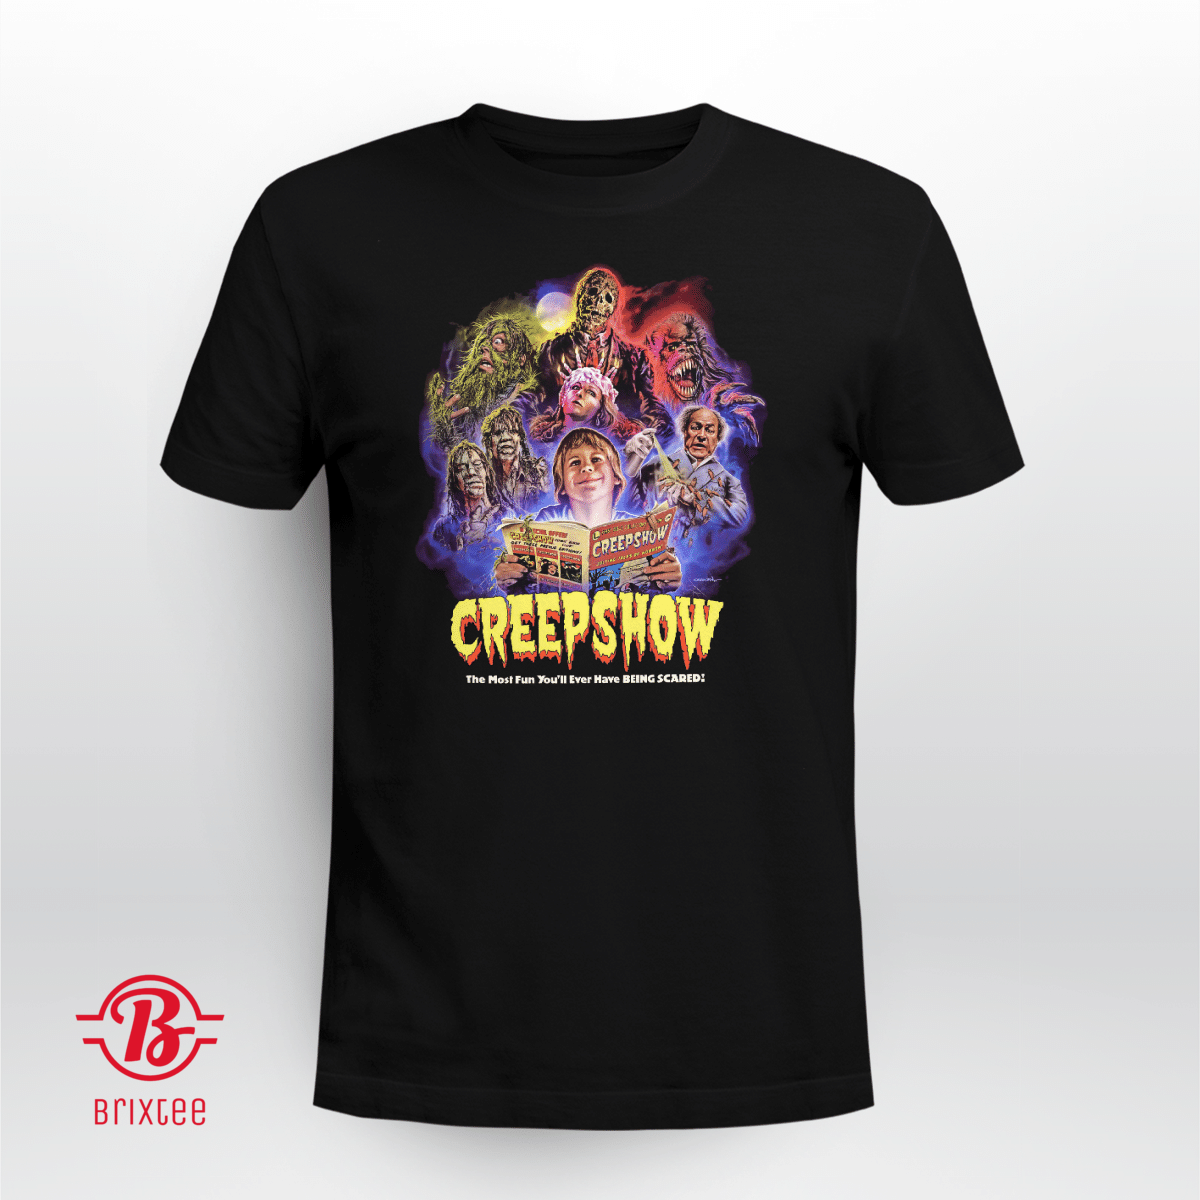 Creepshow - The Most Fun You'll Ever Have BEING SCARED